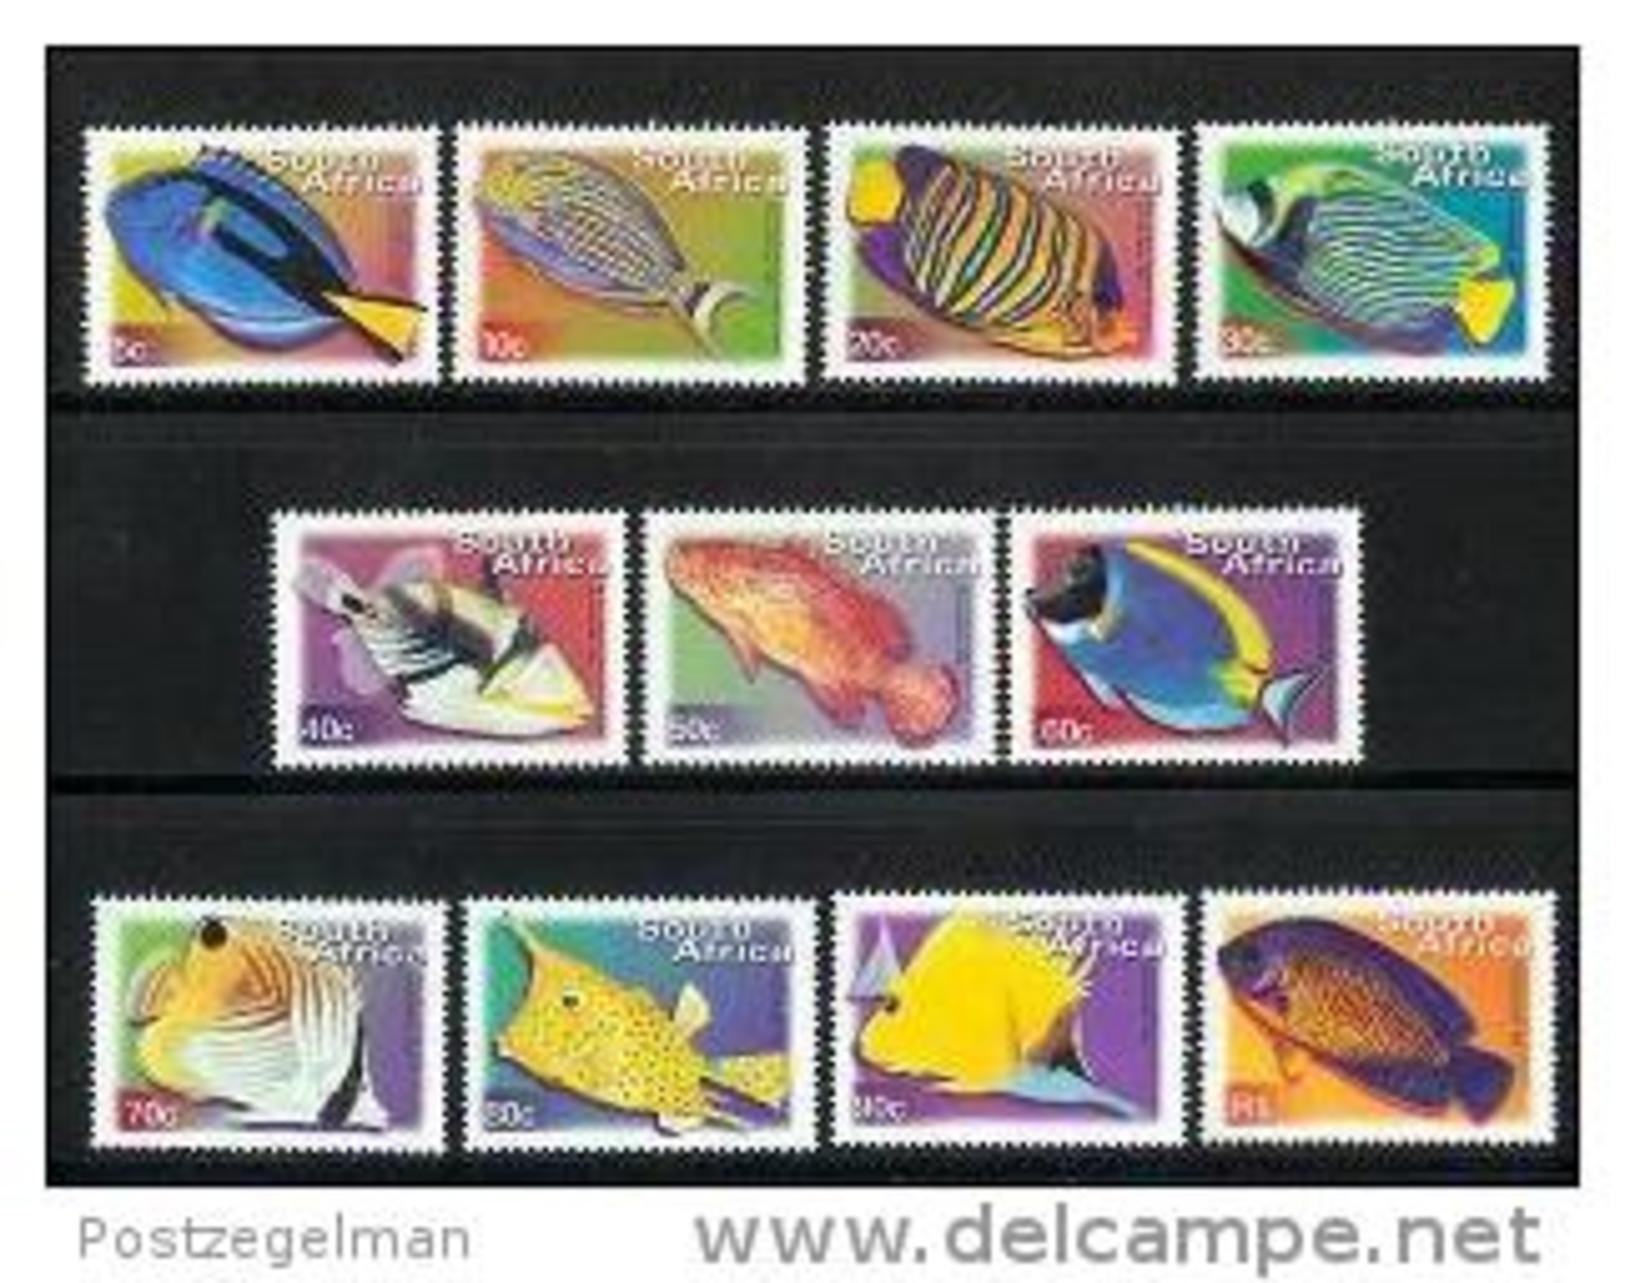 SOUTH AFRICA, 2001, Mint Never Hinged Stamp(s), Definitives Fishes (11 Stamps), Nr(s) 1285-1295 #6756-8 - Nuevos